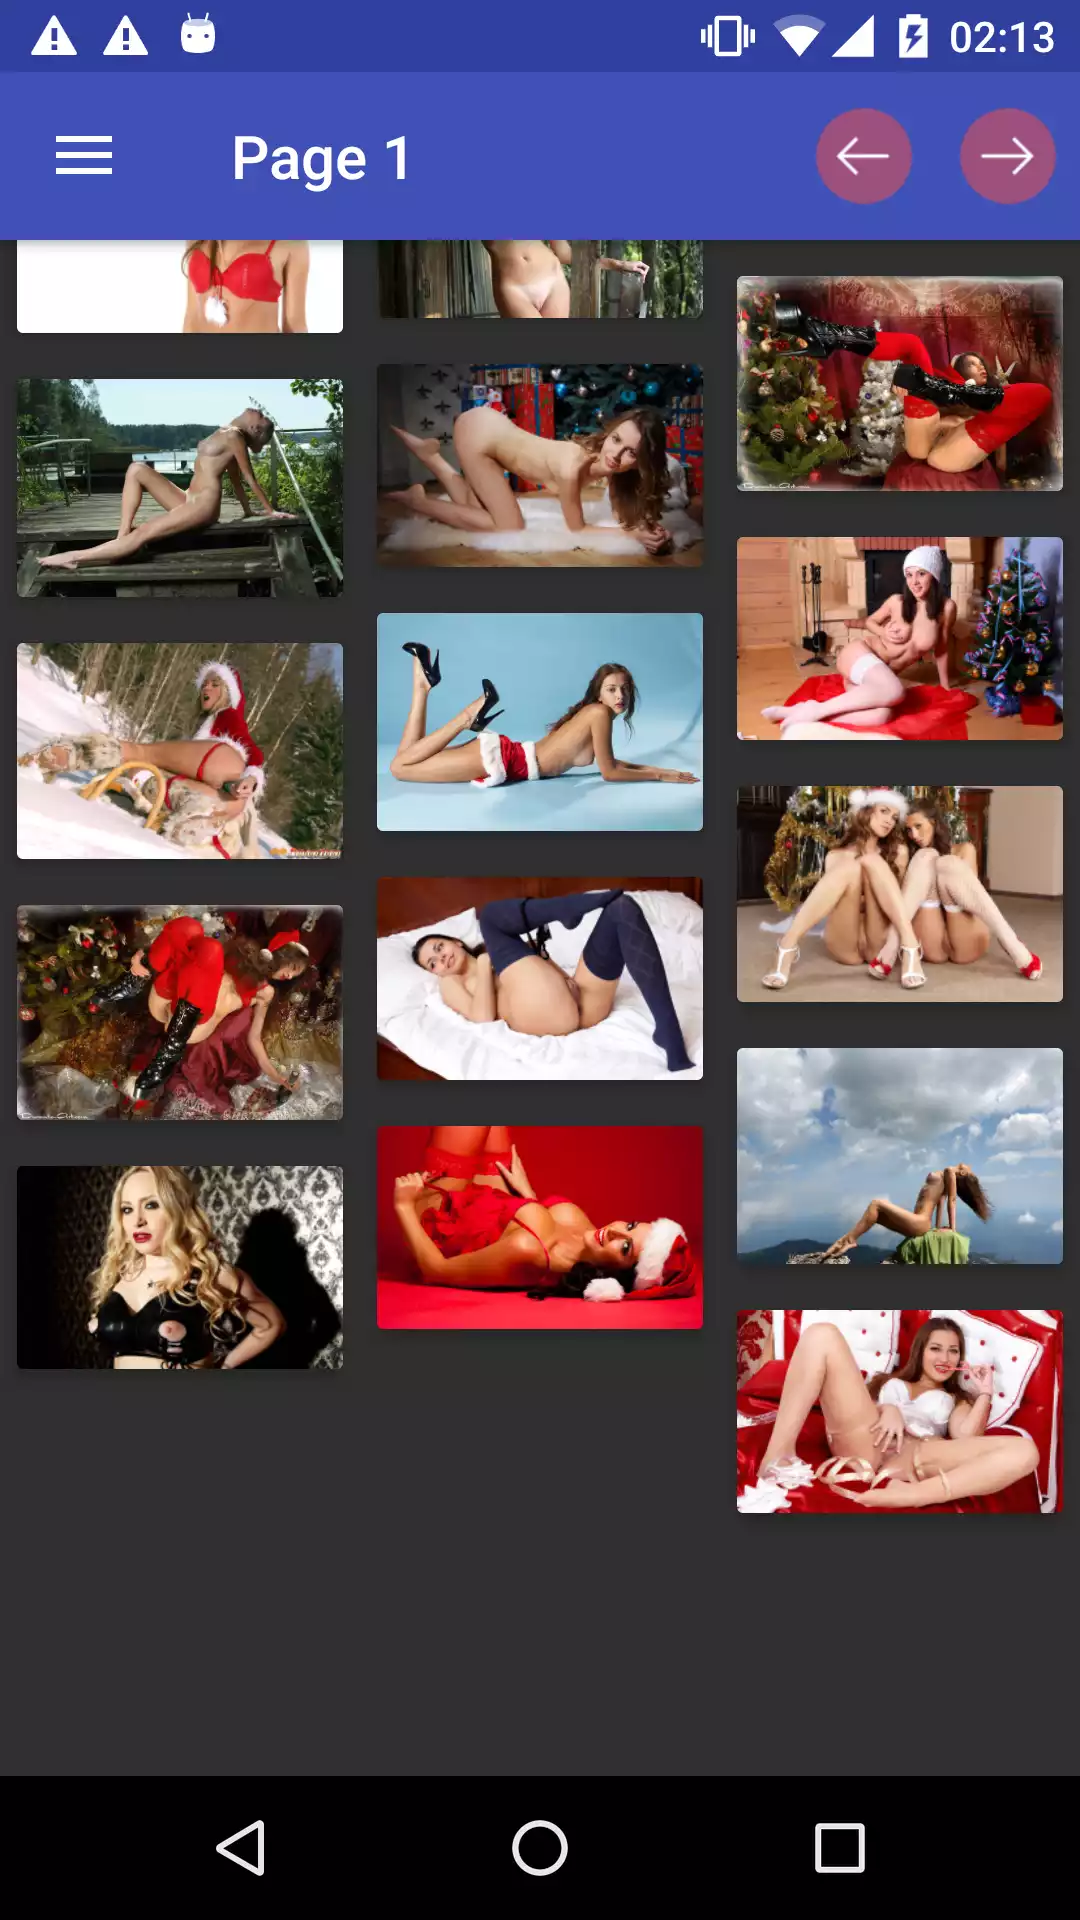 xxx-holidays apk,cuckhold,apps,gallery,app,ann,offline,best,picw,adult,lisa,backgrounds,photos,pic,wallpapers,download,eroticwallpapers,hentai,android,pictures,sexy,hentsi